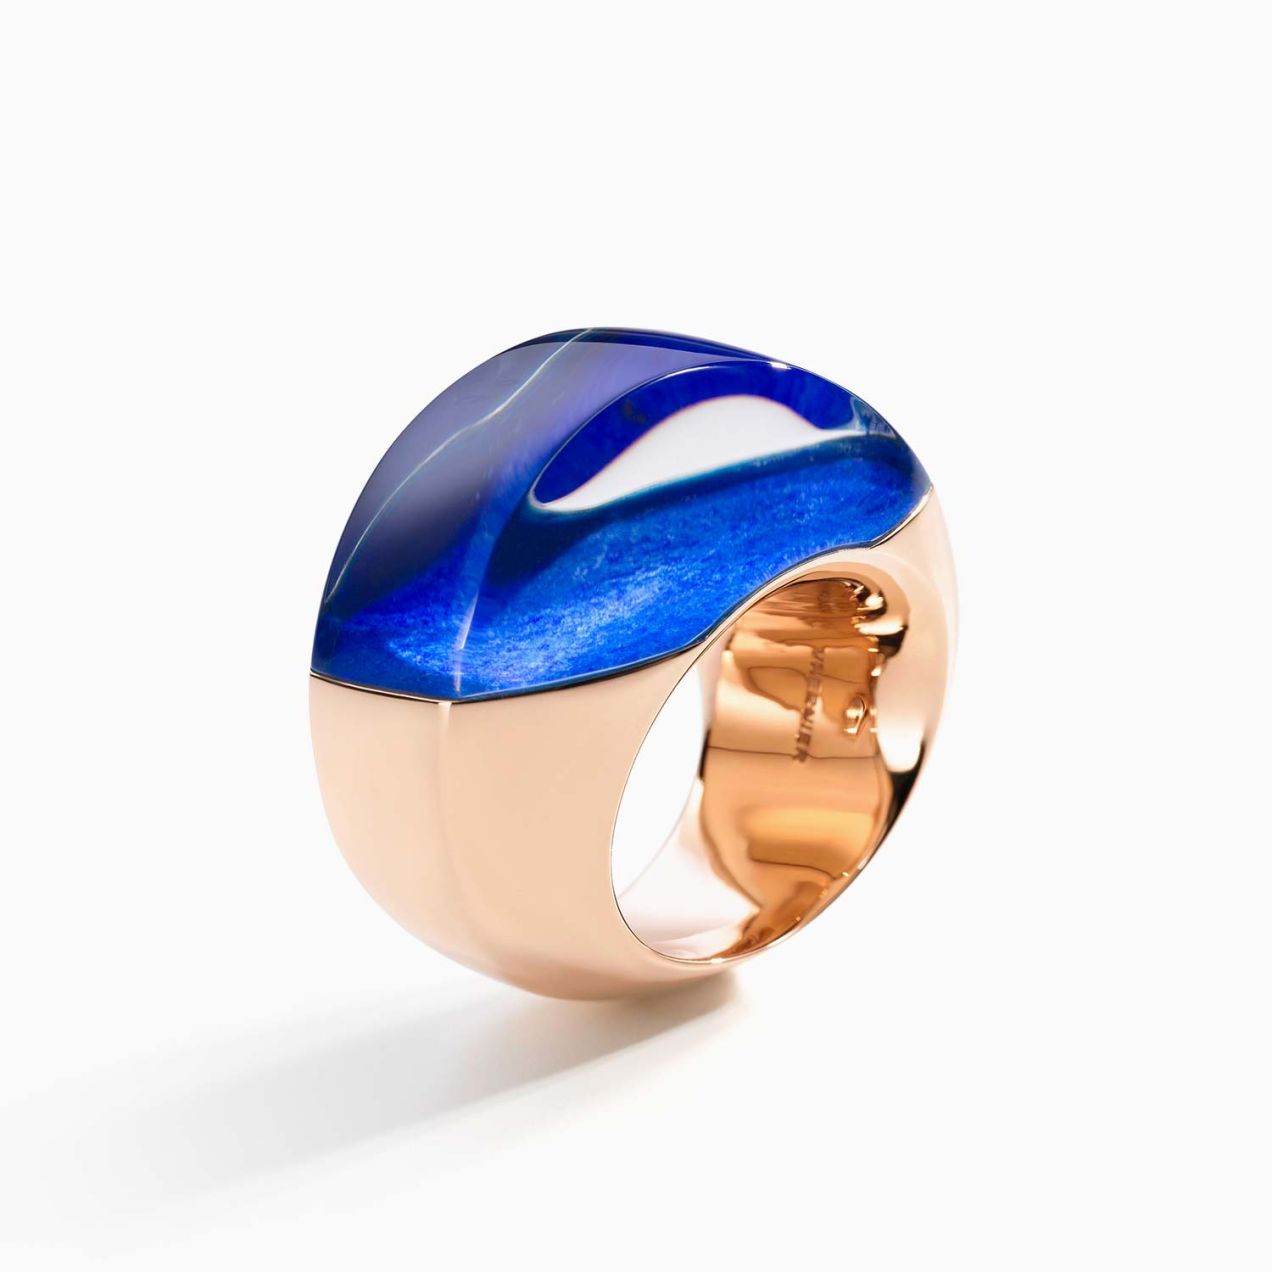 Vhernier aladdin ring in rose gold with quartz crystal and lapis lazuli